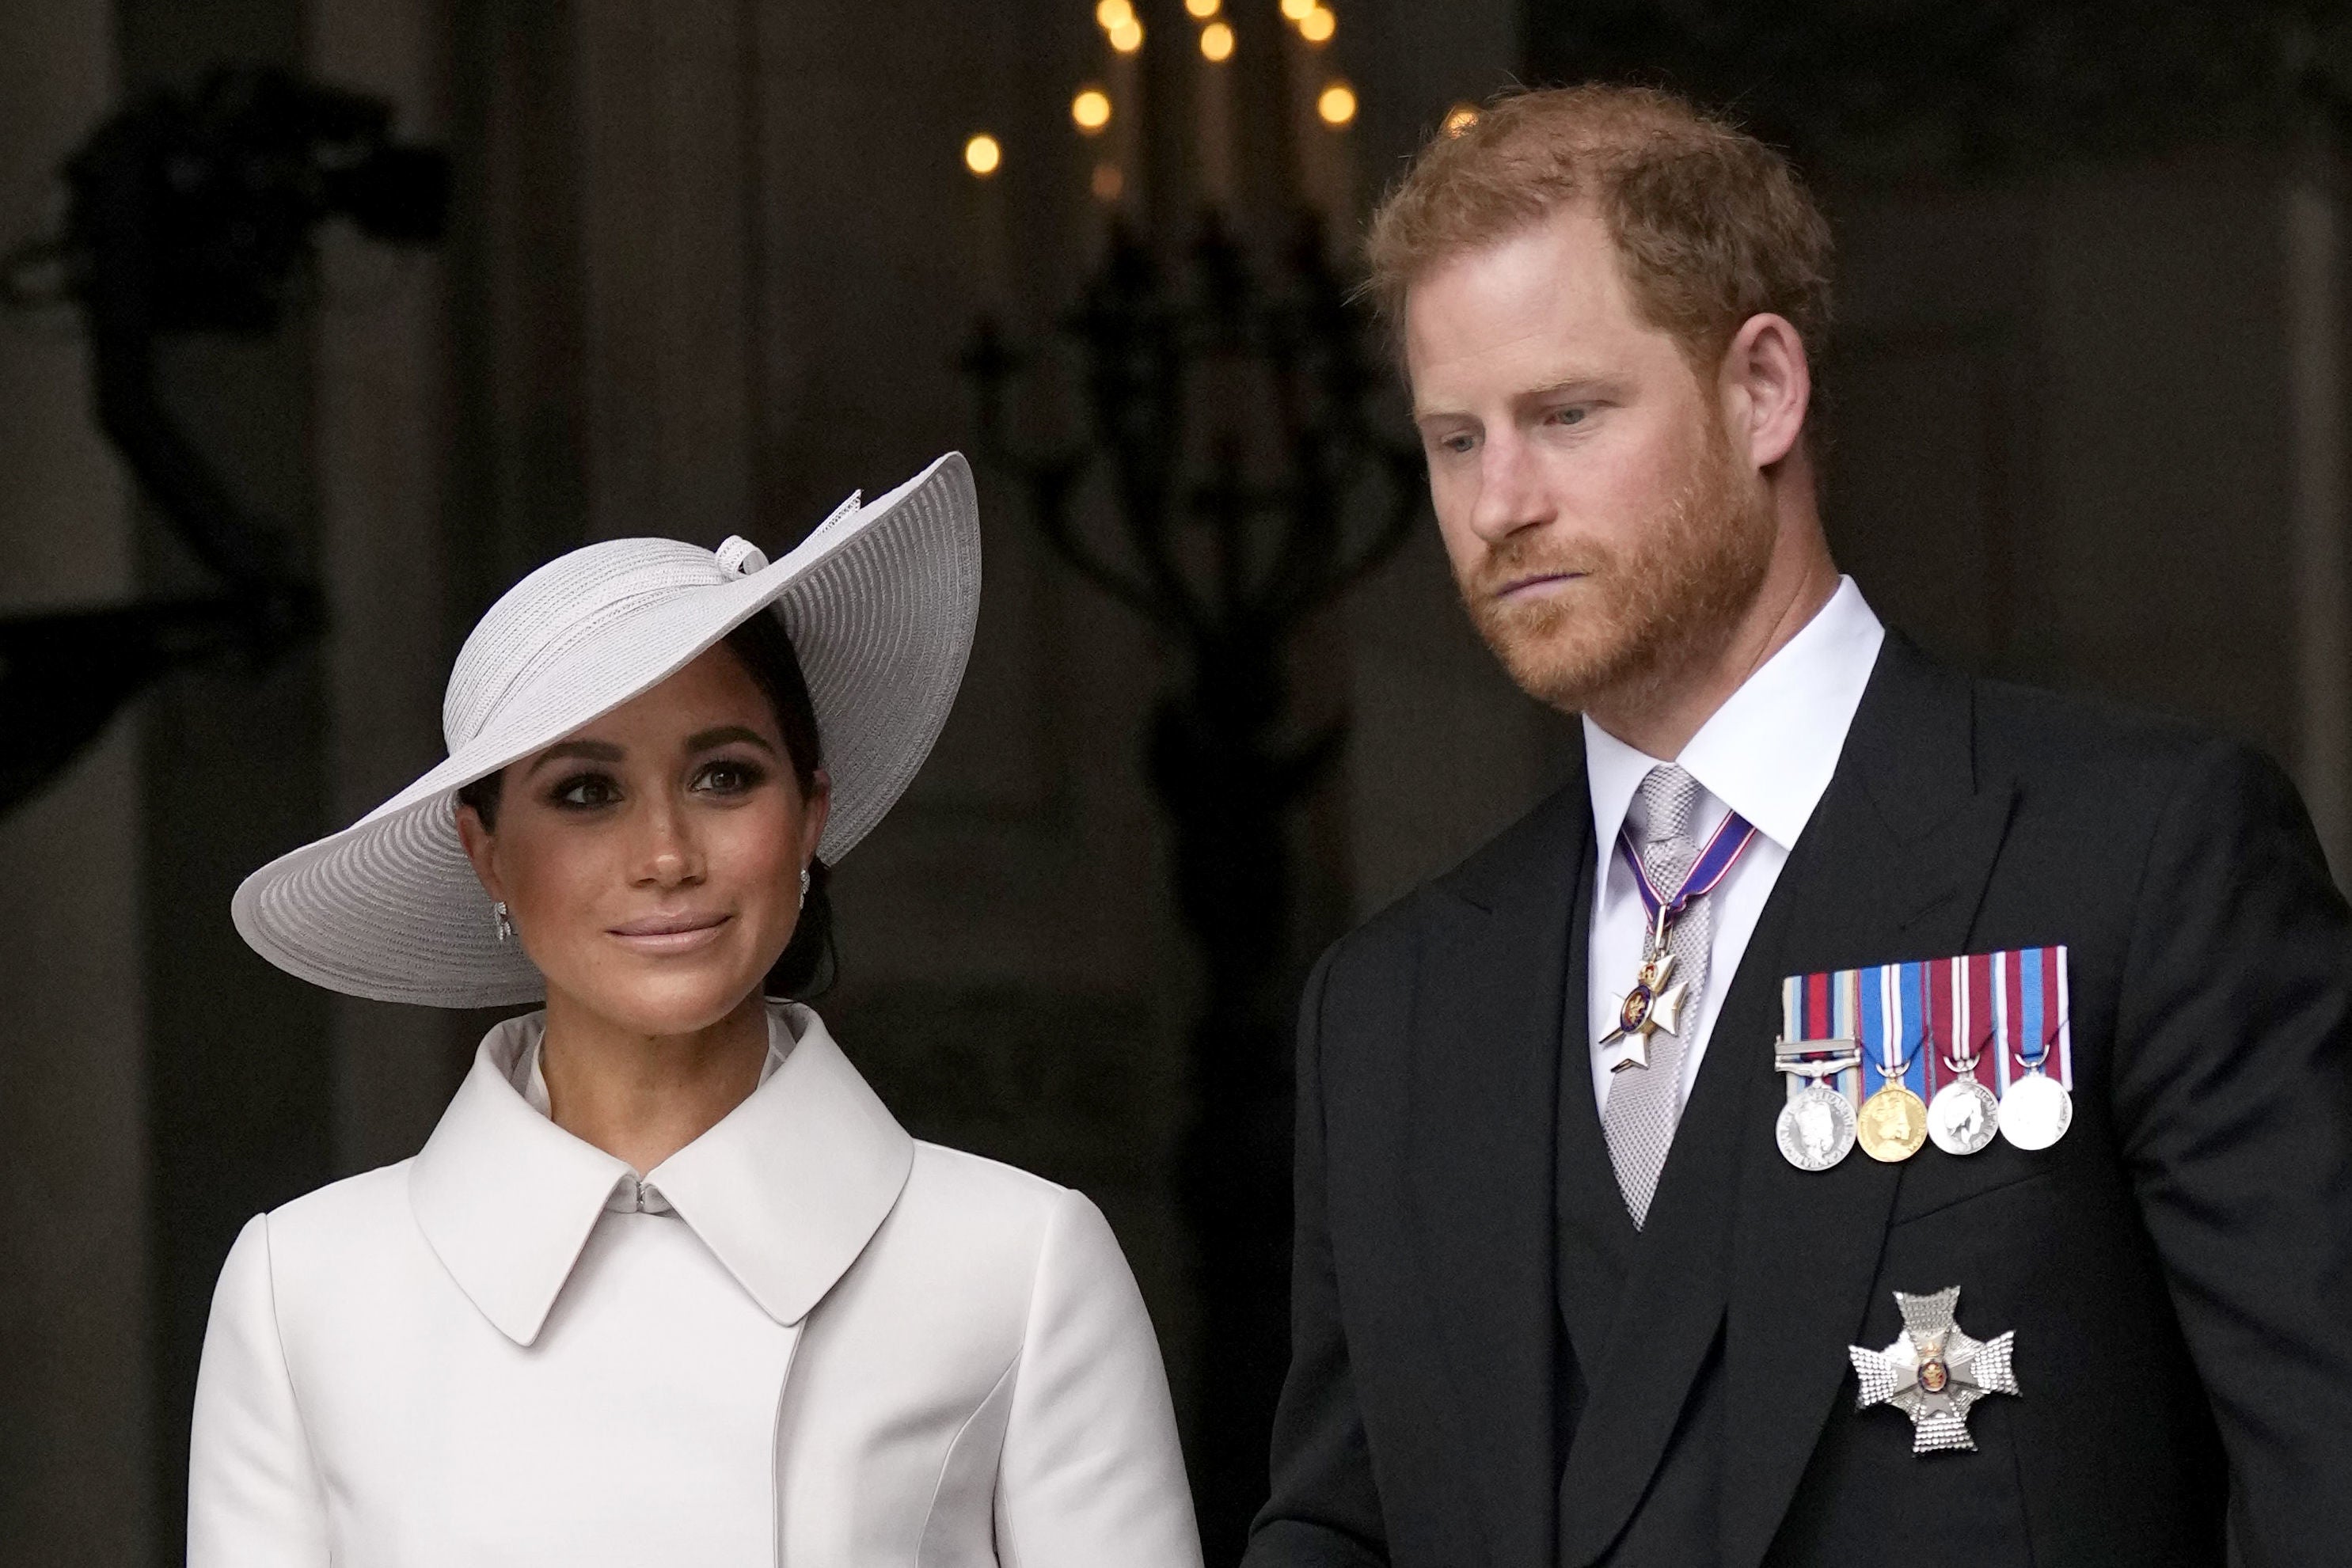 Prince Harry and Meghan Markle were last in the UK for the Queen’s platinum jubilee celebrations in June